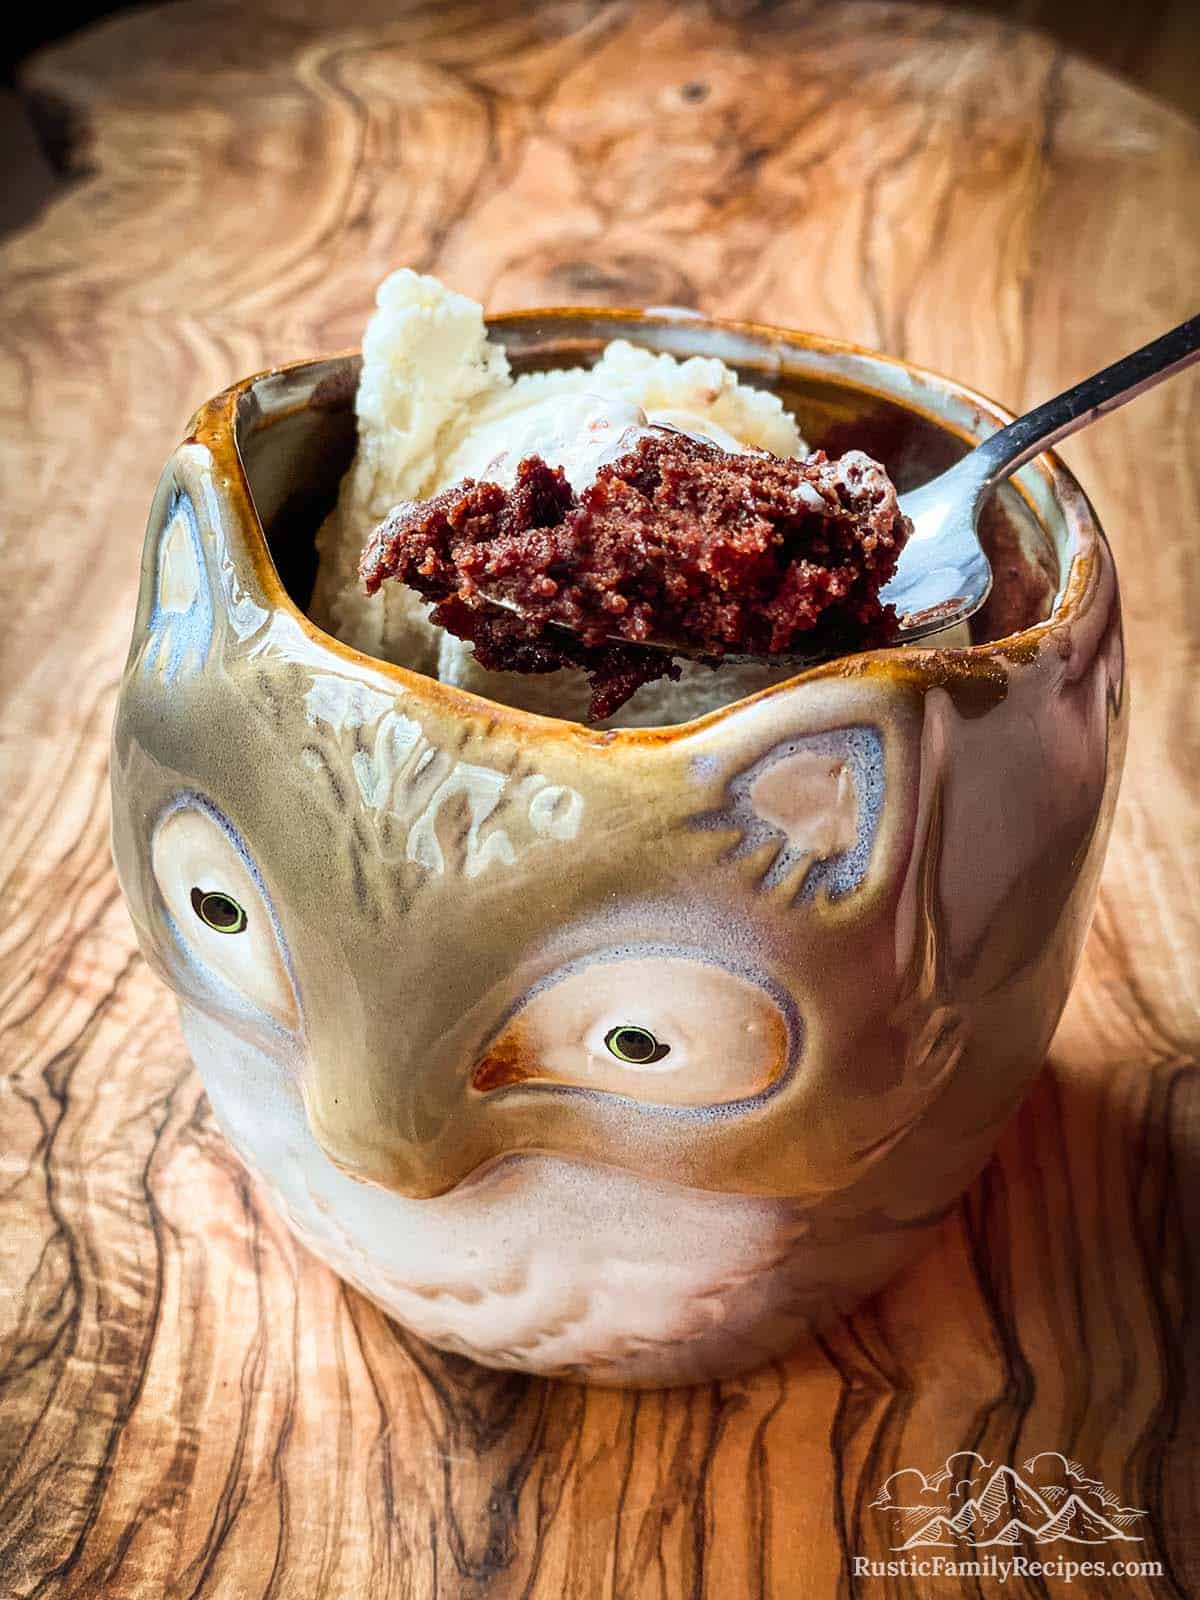 Brownie in a fox shaped mug with ice cream and a spoon scooping some out.